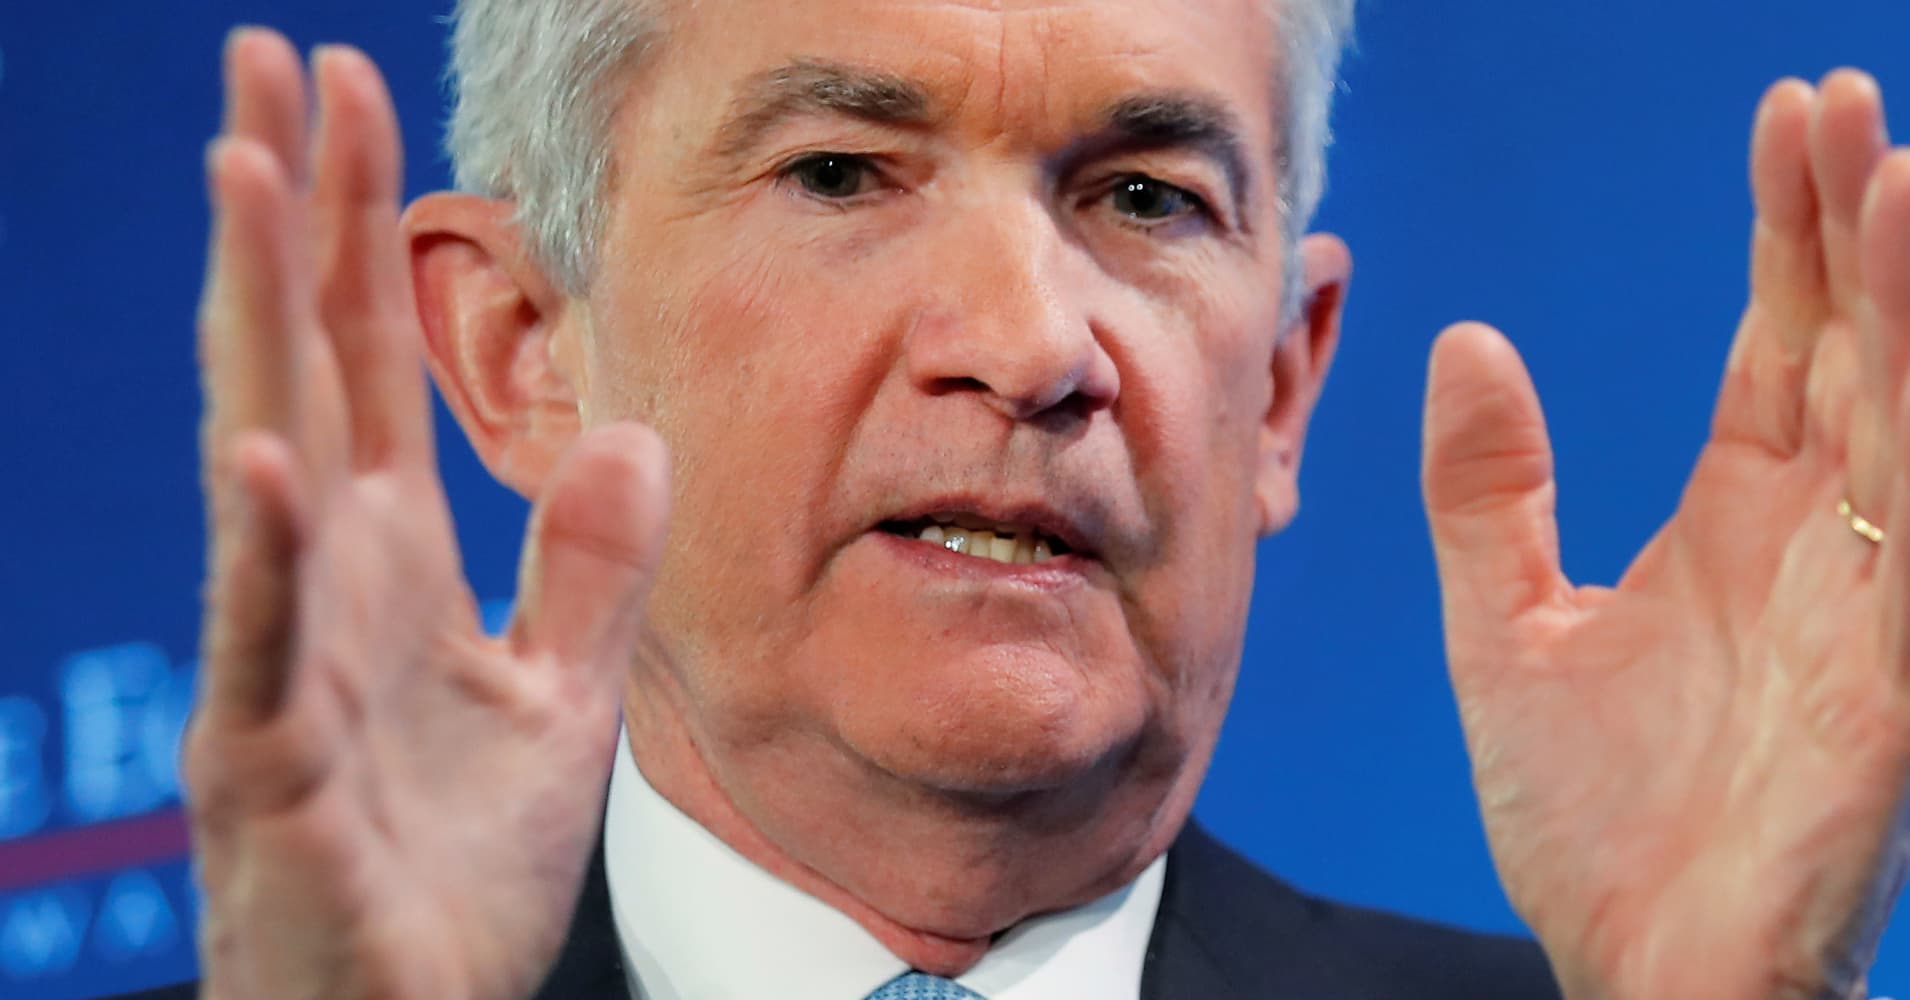 The Fed's policy switch may be too late to save the economy from fading